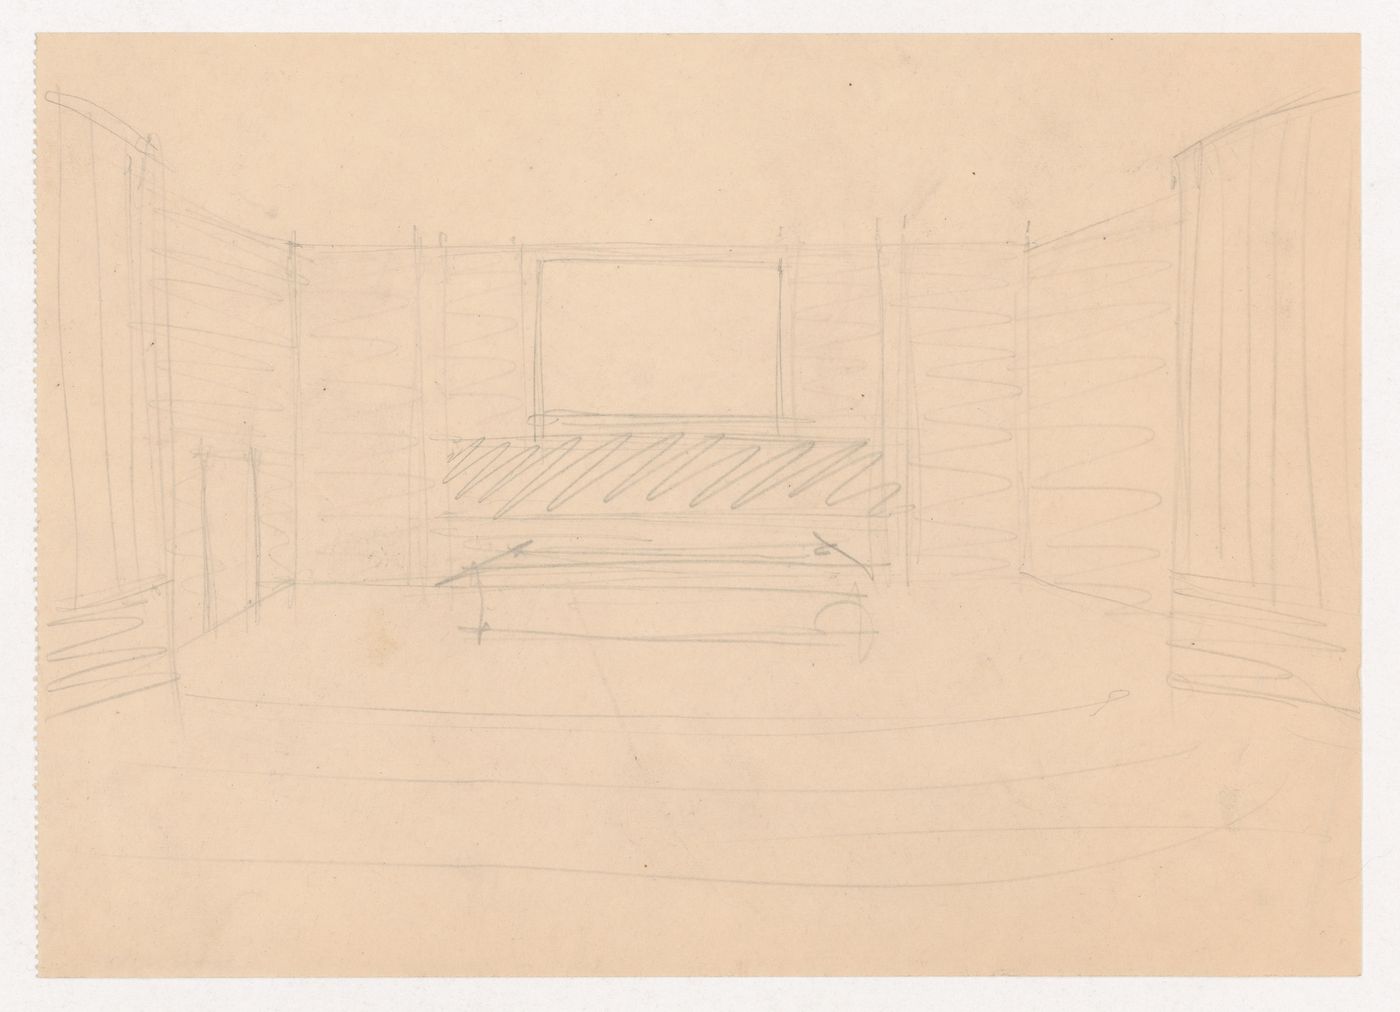 Interior perspective sketch for an auditorium for the Metallurgy Building showing a lectern and screen, Illinois Institute of Technology, Chicago